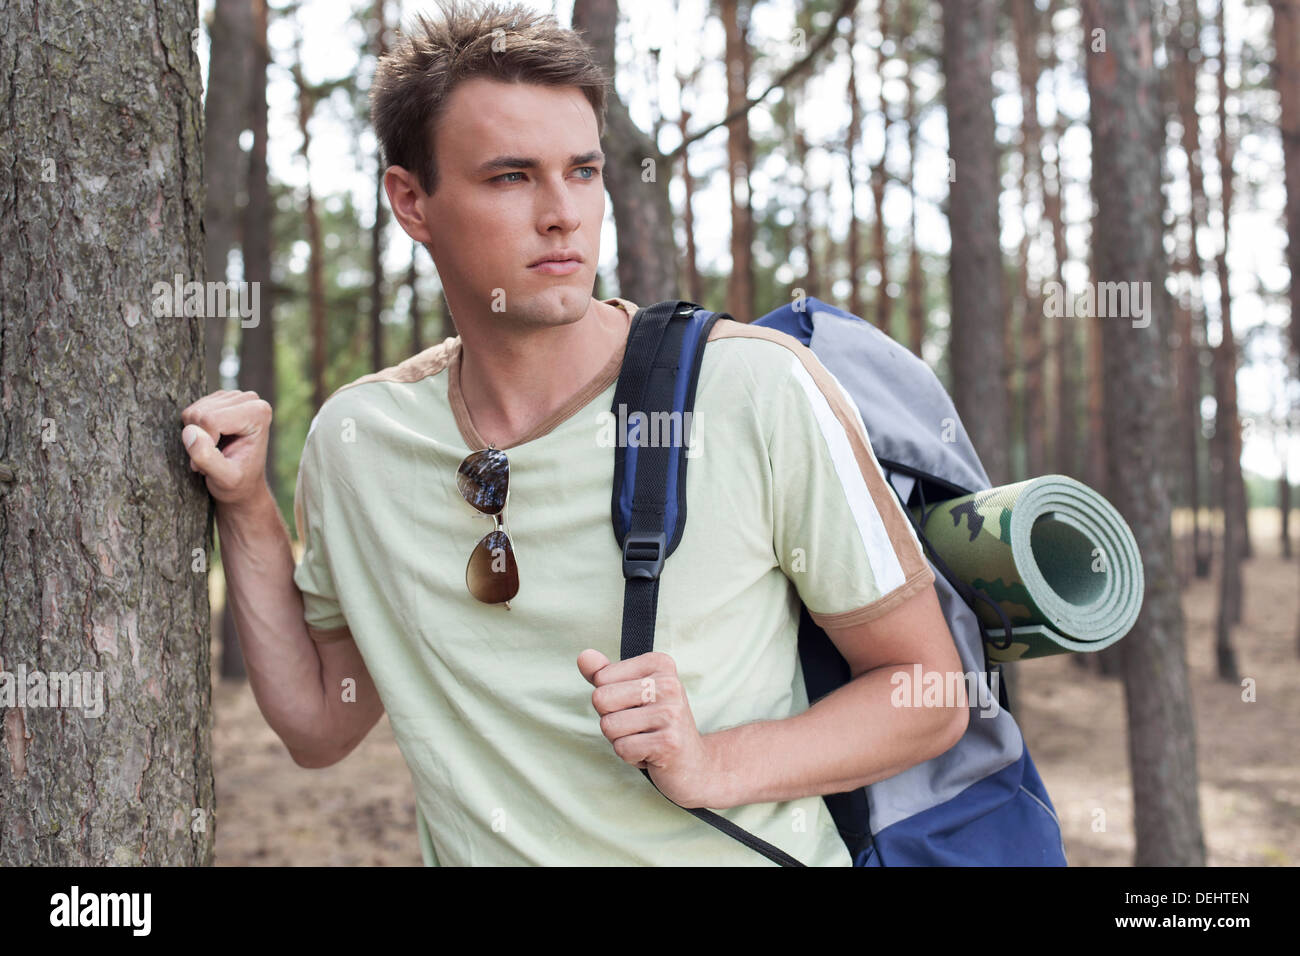 Handsome young man with backpack hiking forest Stock Photo